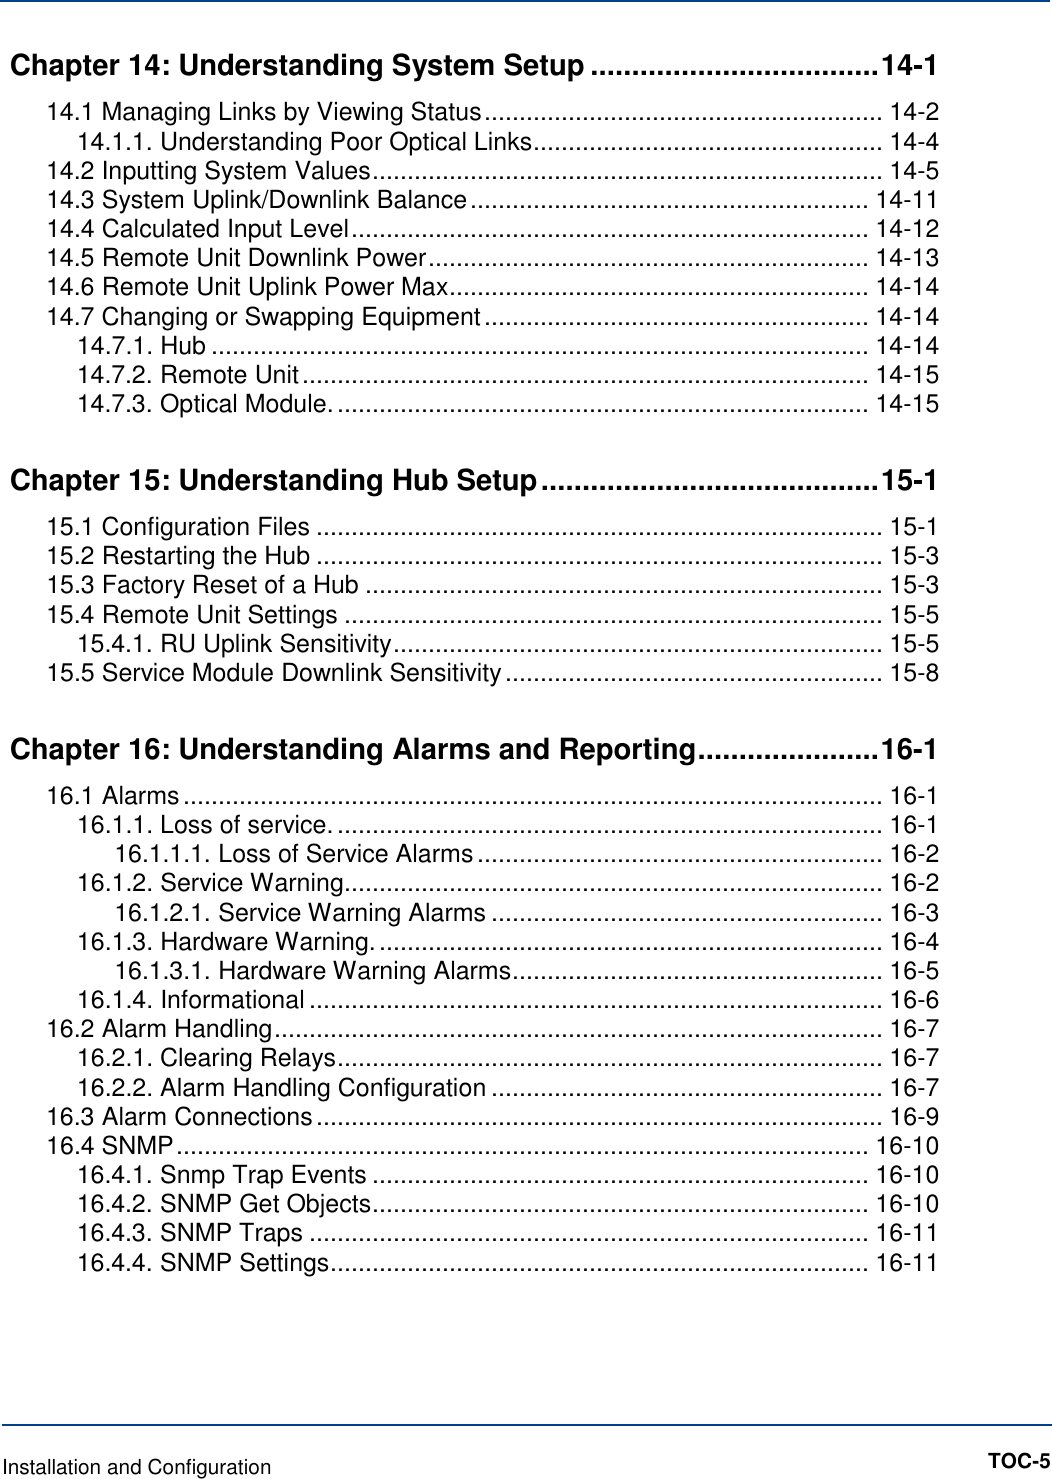 Chapter 14: Understanding System Setup ................................... 14-1 14.1 Managing Links by Viewing Status ......................................................... 14-2 14.1.1. Understanding Poor Optical Links .................................................. 14-4 14.2 Inputting System Values ......................................................................... 14-5 14.3 System Uplink/Downlink Balance ......................................................... 14-11 14.4 Calculated Input Level .......................................................................... 14-12 14.5 Remote Unit Downlink Power ............................................................... 14-13 14.6 Remote Unit Uplink Power Max ............................................................ 14-14 14.7 Changing or Swapping Equipment ....................................................... 14-14 14.7.1. Hub .............................................................................................. 14-14 14.7.2. Remote Unit ................................................................................. 14-15 14.7.3. Optical Module. ............................................................................ 14-15 Chapter 15: Understanding Hub Setup ......................................... 15-1 15.1 Configuration Files ................................................................................. 15-1 15.2 Restarting the Hub ................................................................................. 15-3 15.3 Factory Reset of a Hub .......................................................................... 15-3 15.4 Remote Unit Settings ............................................................................. 15-5 15.4.1. RU Uplink Sensitivity ...................................................................... 15-5 15.5 Service Module Downlink Sensitivity ...................................................... 15-8 Chapter 16: Understanding Alarms and Reporting ...................... 16-1 16.1 Alarms .................................................................................................... 16-1 16.1.1. Loss of service. .............................................................................. 16-1 16.1.1.1. Loss of Service Alarms .......................................................... 16-2 16.1.2. Service Warning ............................................................................. 16-2 16.1.2.1. Service Warning Alarms ........................................................ 16-3 16.1.3. Hardware Warning. ........................................................................ 16-4 16.1.3.1. Hardware Warning Alarms ..................................................... 16-5 16.1.4. Informational .................................................................................. 16-6 16.2 Alarm Handling ....................................................................................... 16-7 16.2.1. Clearing Relays .............................................................................. 16-7 16.2.2. Alarm Handling Configuration ........................................................ 16-7 16.3 Alarm Connections ................................................................................. 16-9 16.4 SNMP ................................................................................................... 16-10 16.4.1. Snmp Trap Events ....................................................................... 16-10 16.4.2. SNMP Get Objects ....................................................................... 16-10 16.4.3. SNMP Traps ................................................................................ 16-11 16.4.4. SNMP Settings ............................................................................. 16-11        Installation and Configuration       TOC-5 